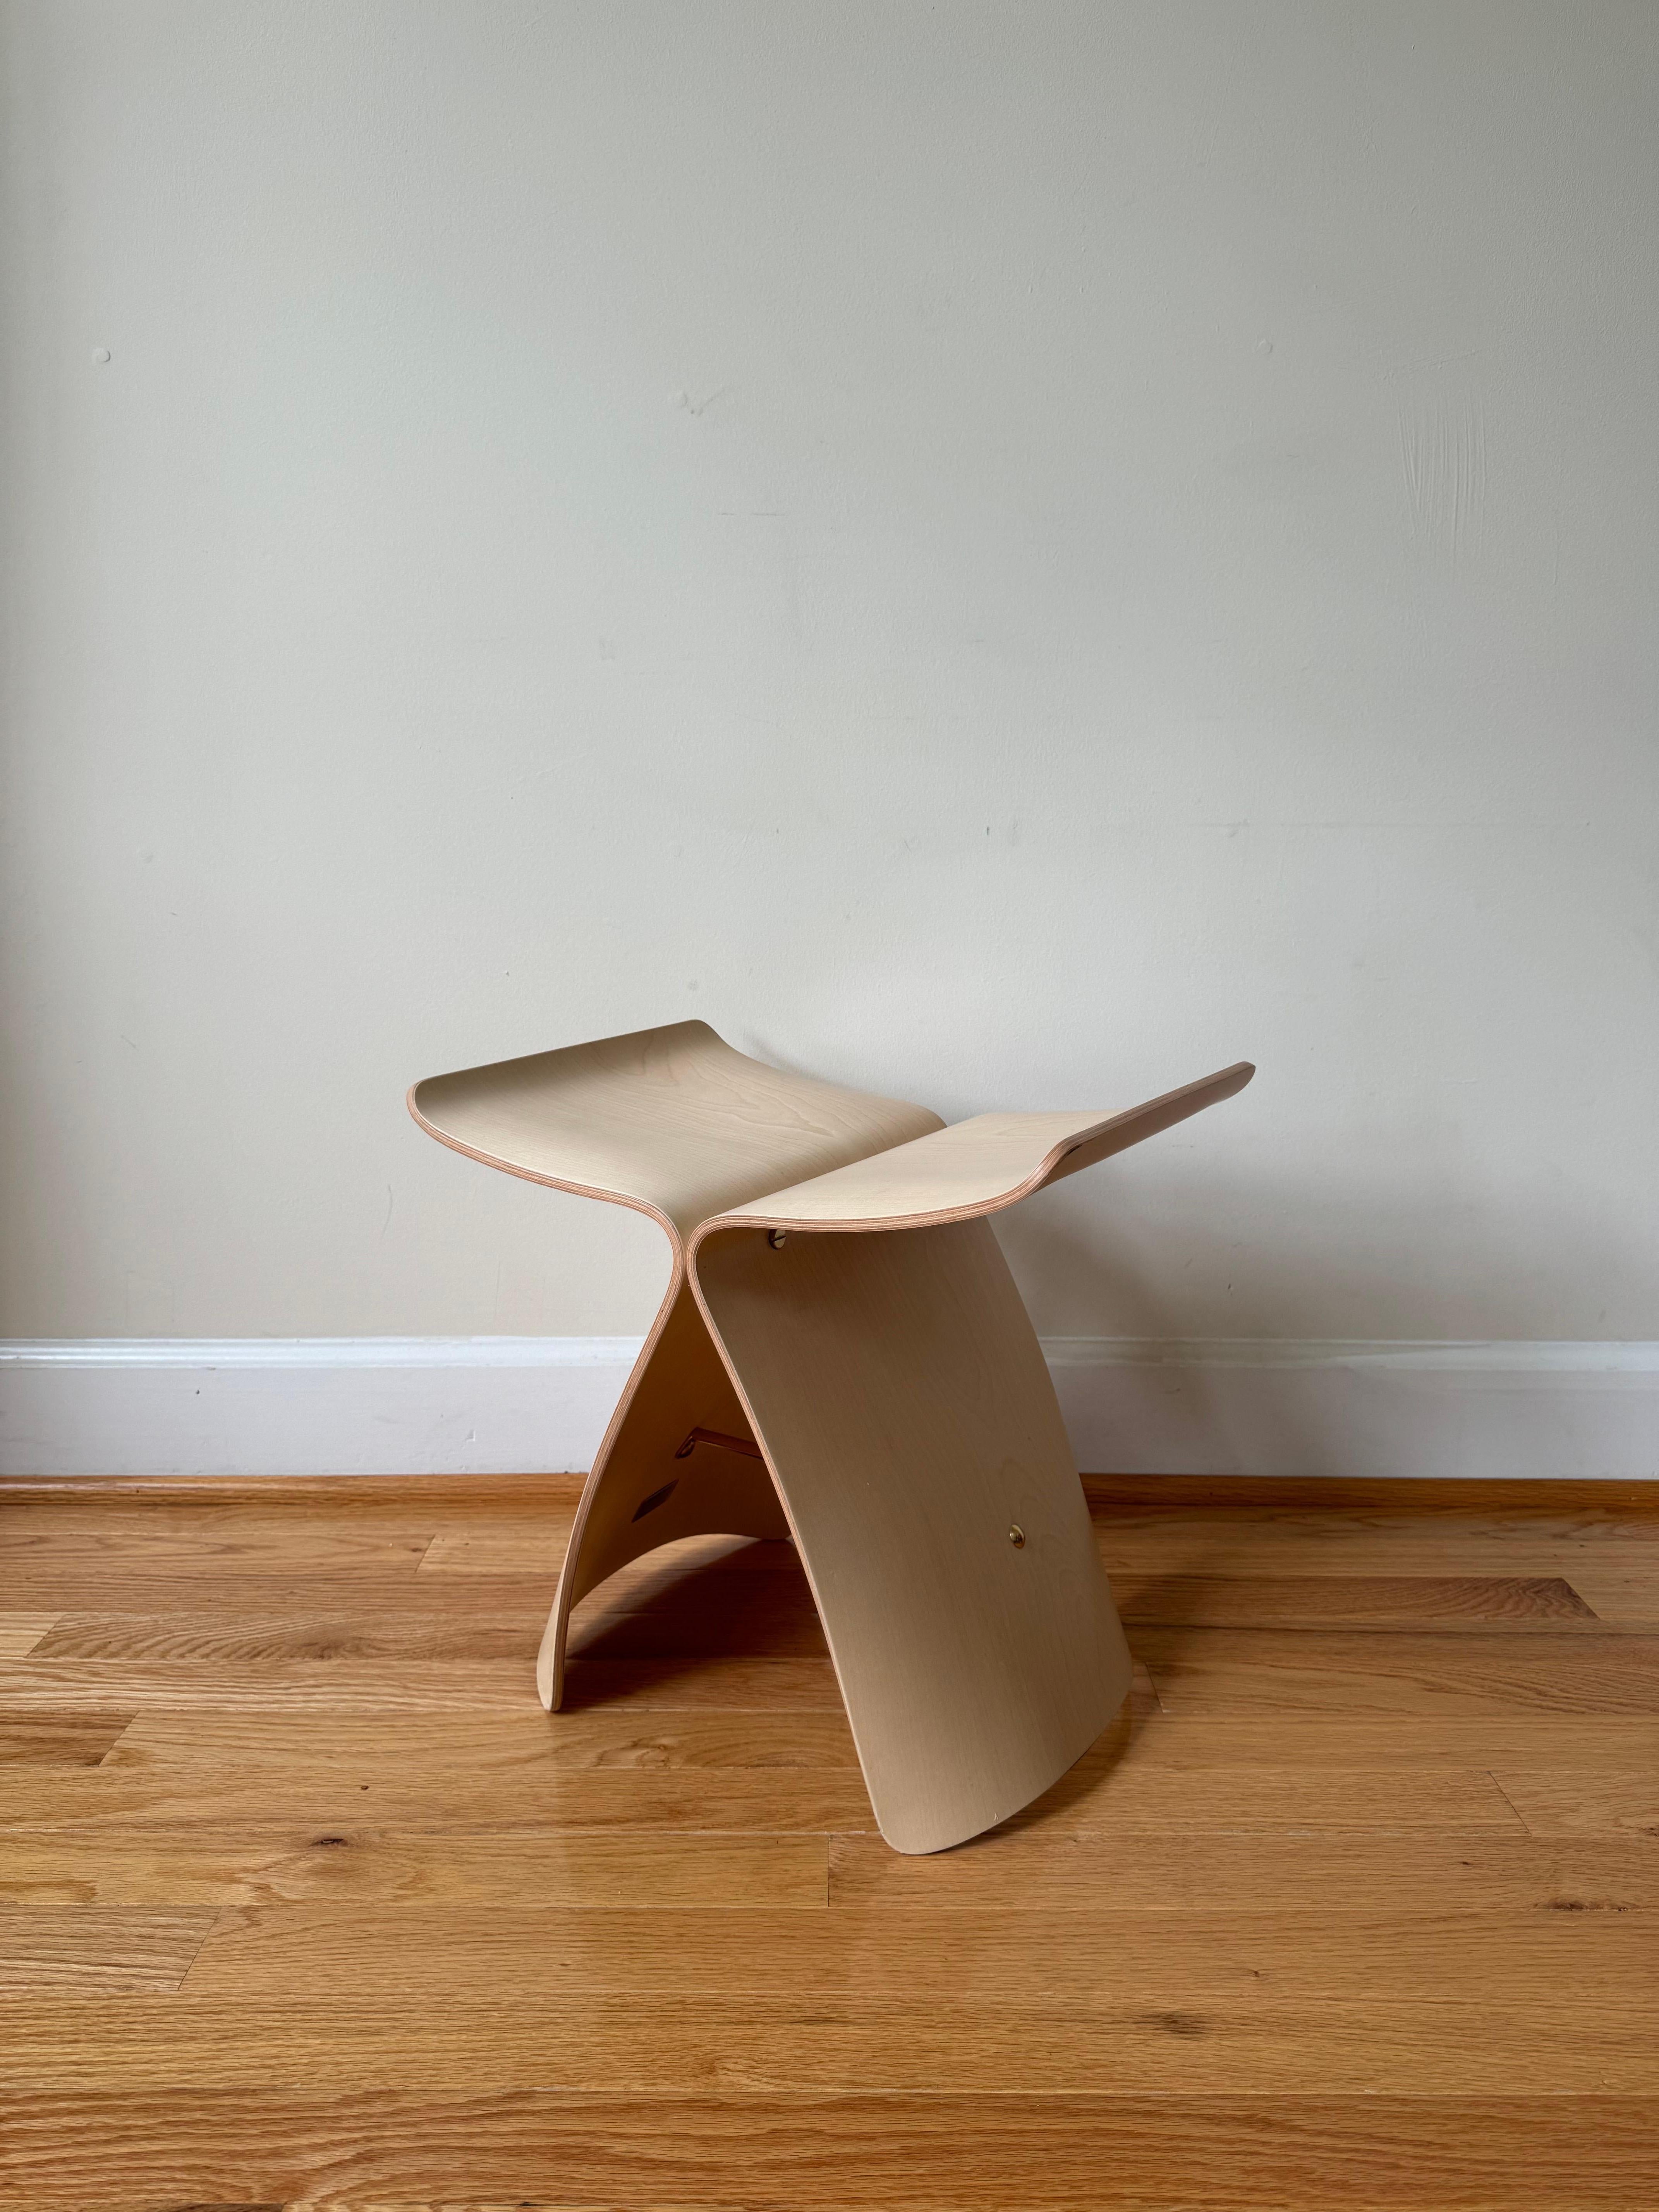 Ease of travel in the jet age encouraged a growing fusion of cultural influences after World War II. 
Although Yanagi's stool was designed and manufactured in Japan, it employs Western form (the stool) and material (bentwood). Its calligraphic